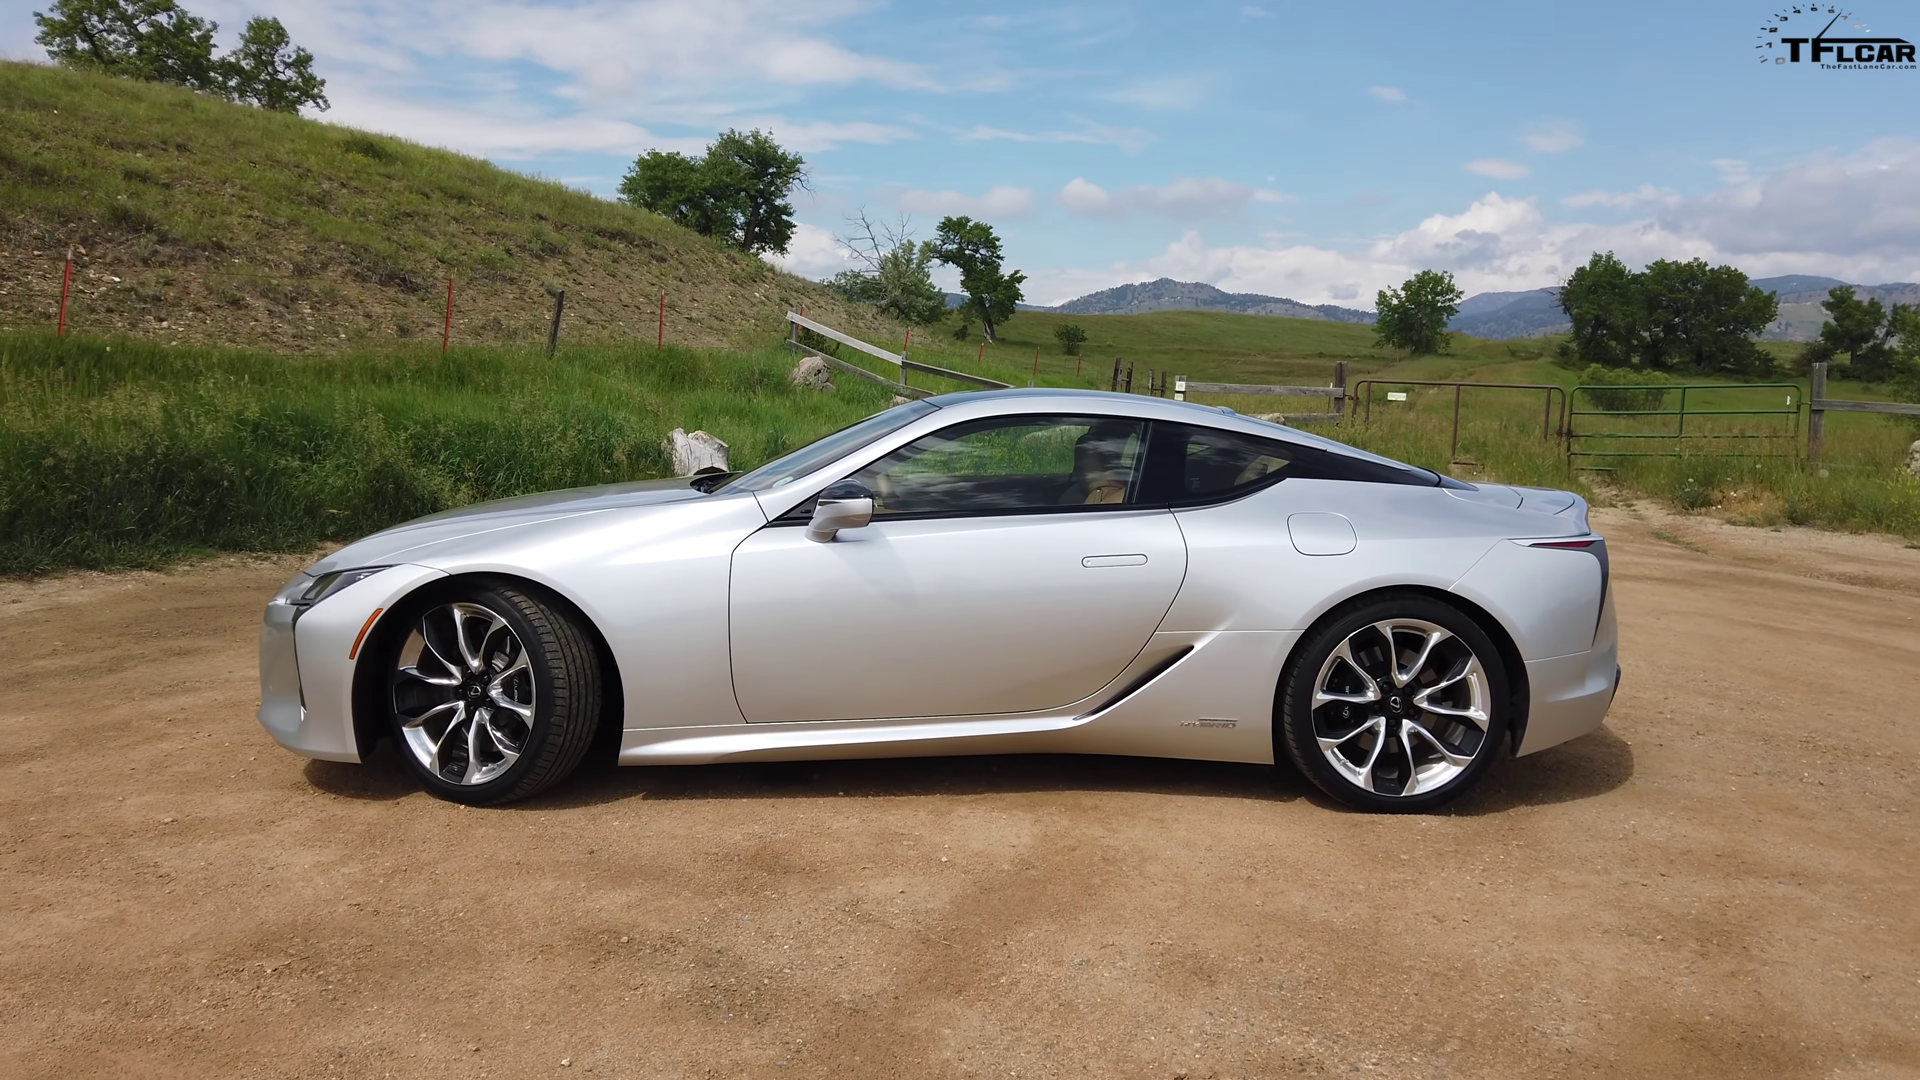 2019 Lexus LC 500h Gets High Praise from <i>Fast Lane Car</i>